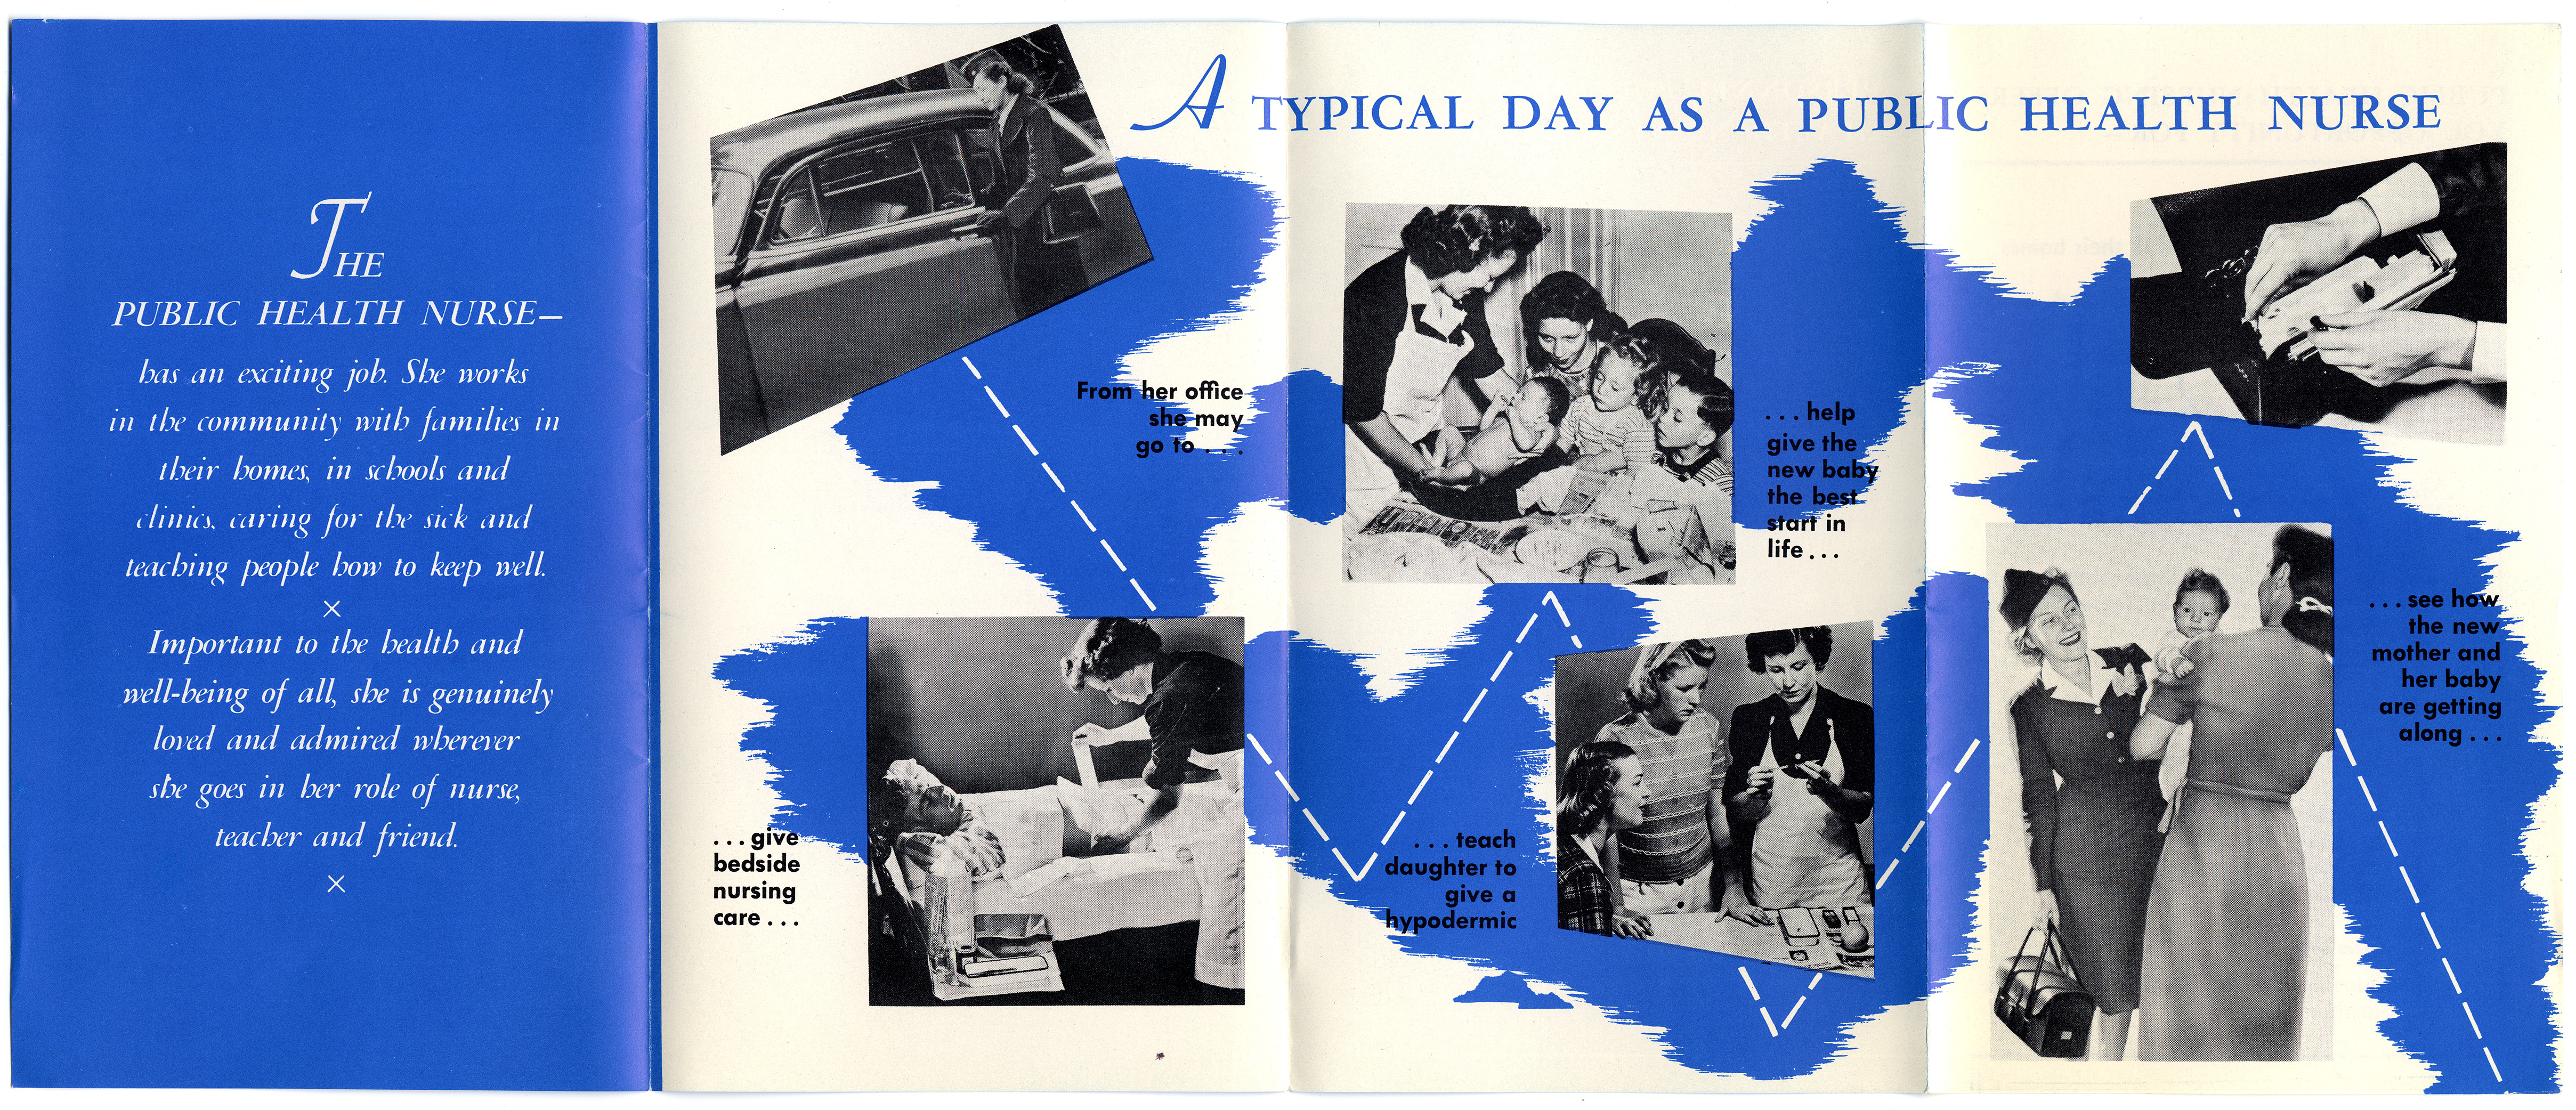 Interior of a public health nursing brochure shows a nurse going about her day working in public health